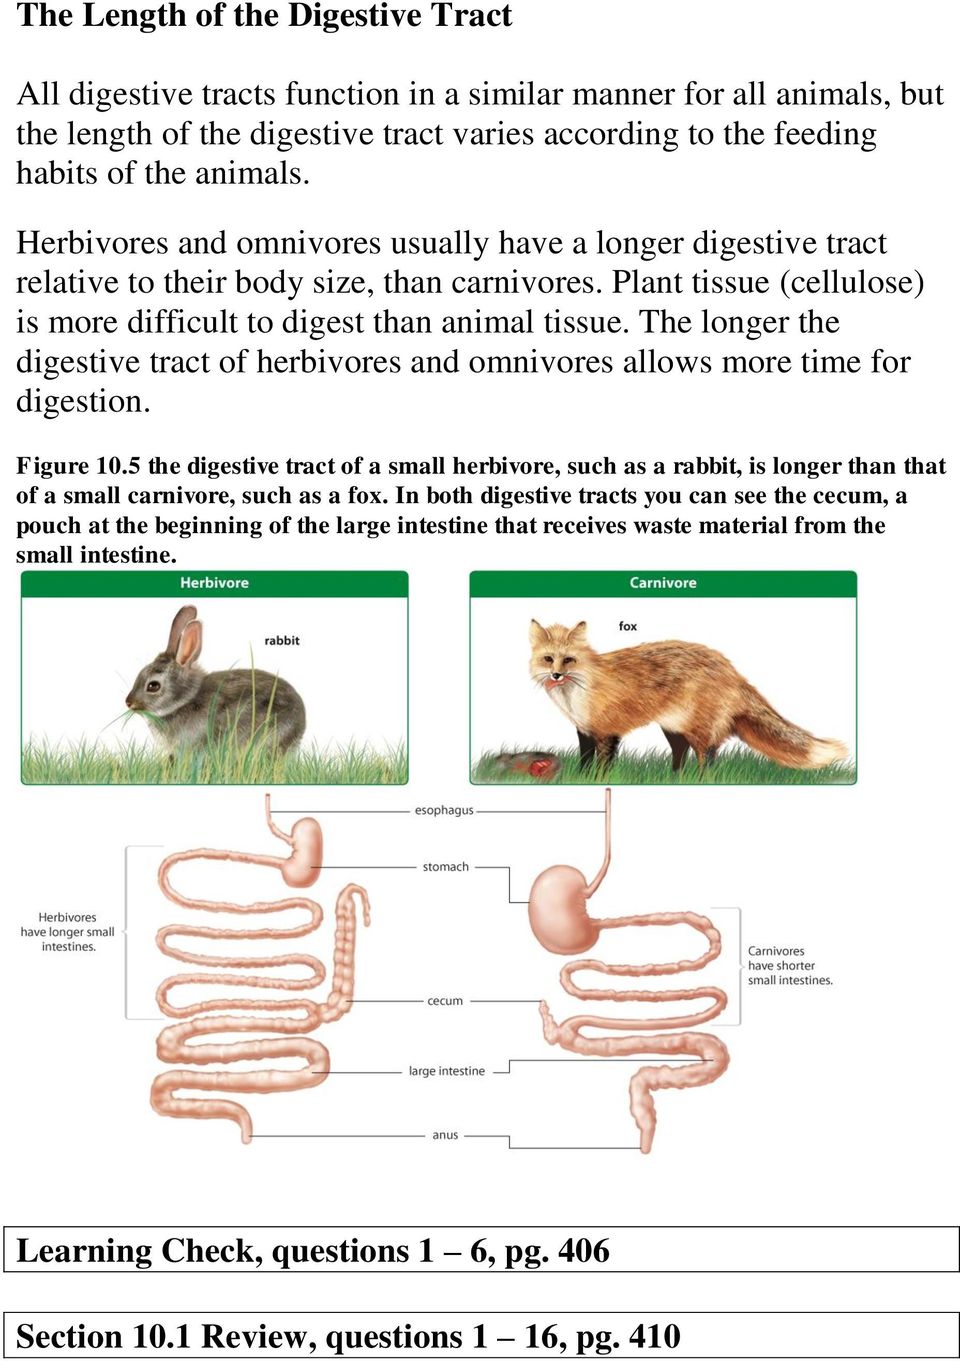 The longer the digestive tract of herbivores and omnivores allows more time for digestion. Figure 10.